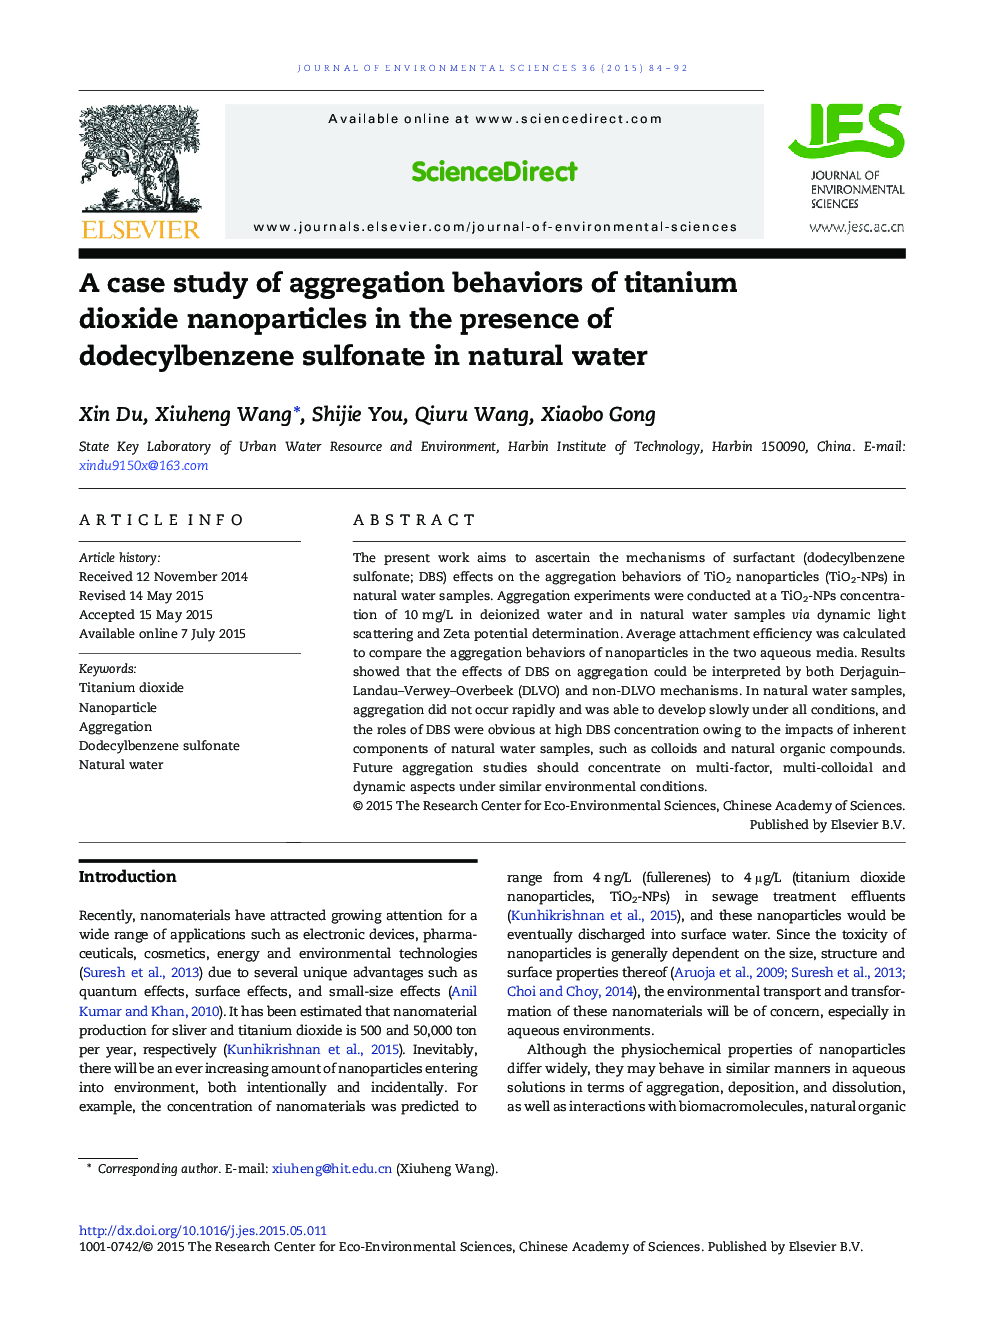 A case study of aggregation behaviors of titanium dioxide nanoparticles in the presence of dodecylbenzene sulfonate in natural water